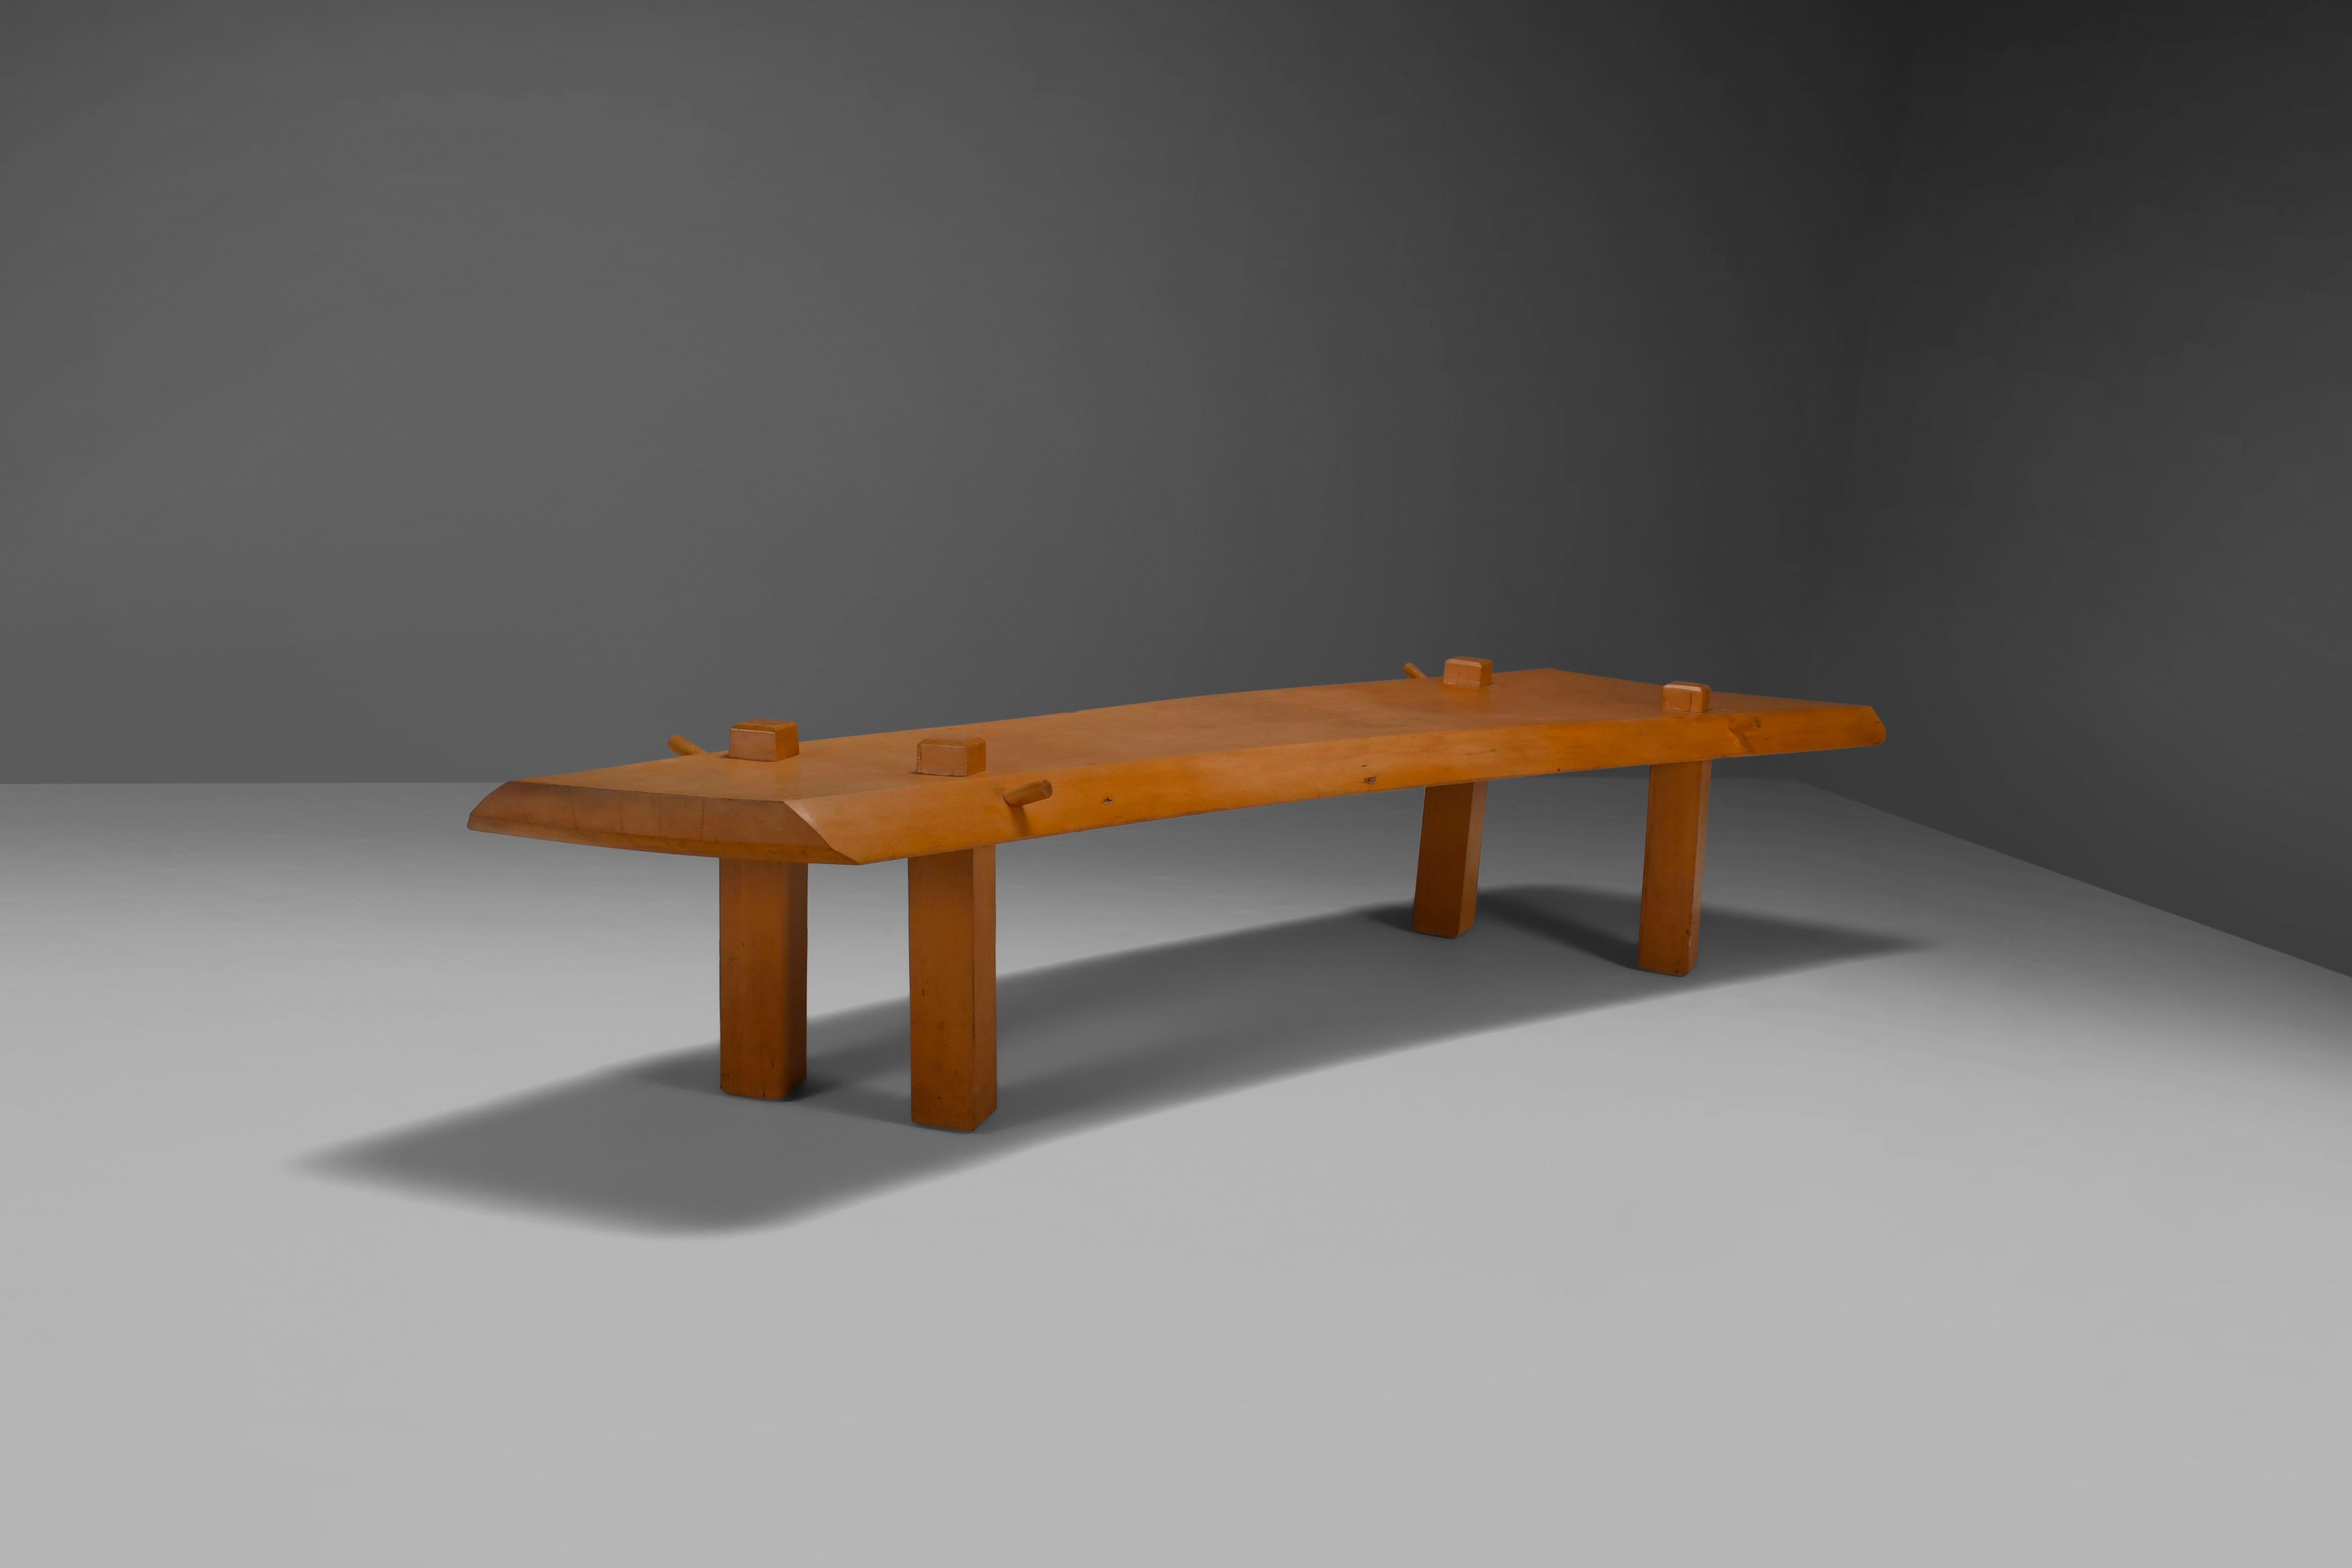 XXL (104 Inch Long) Brutalist Artisan Coffee Table in Solid Oak, France 1960s In Good Condition For Sale In Echt, NL